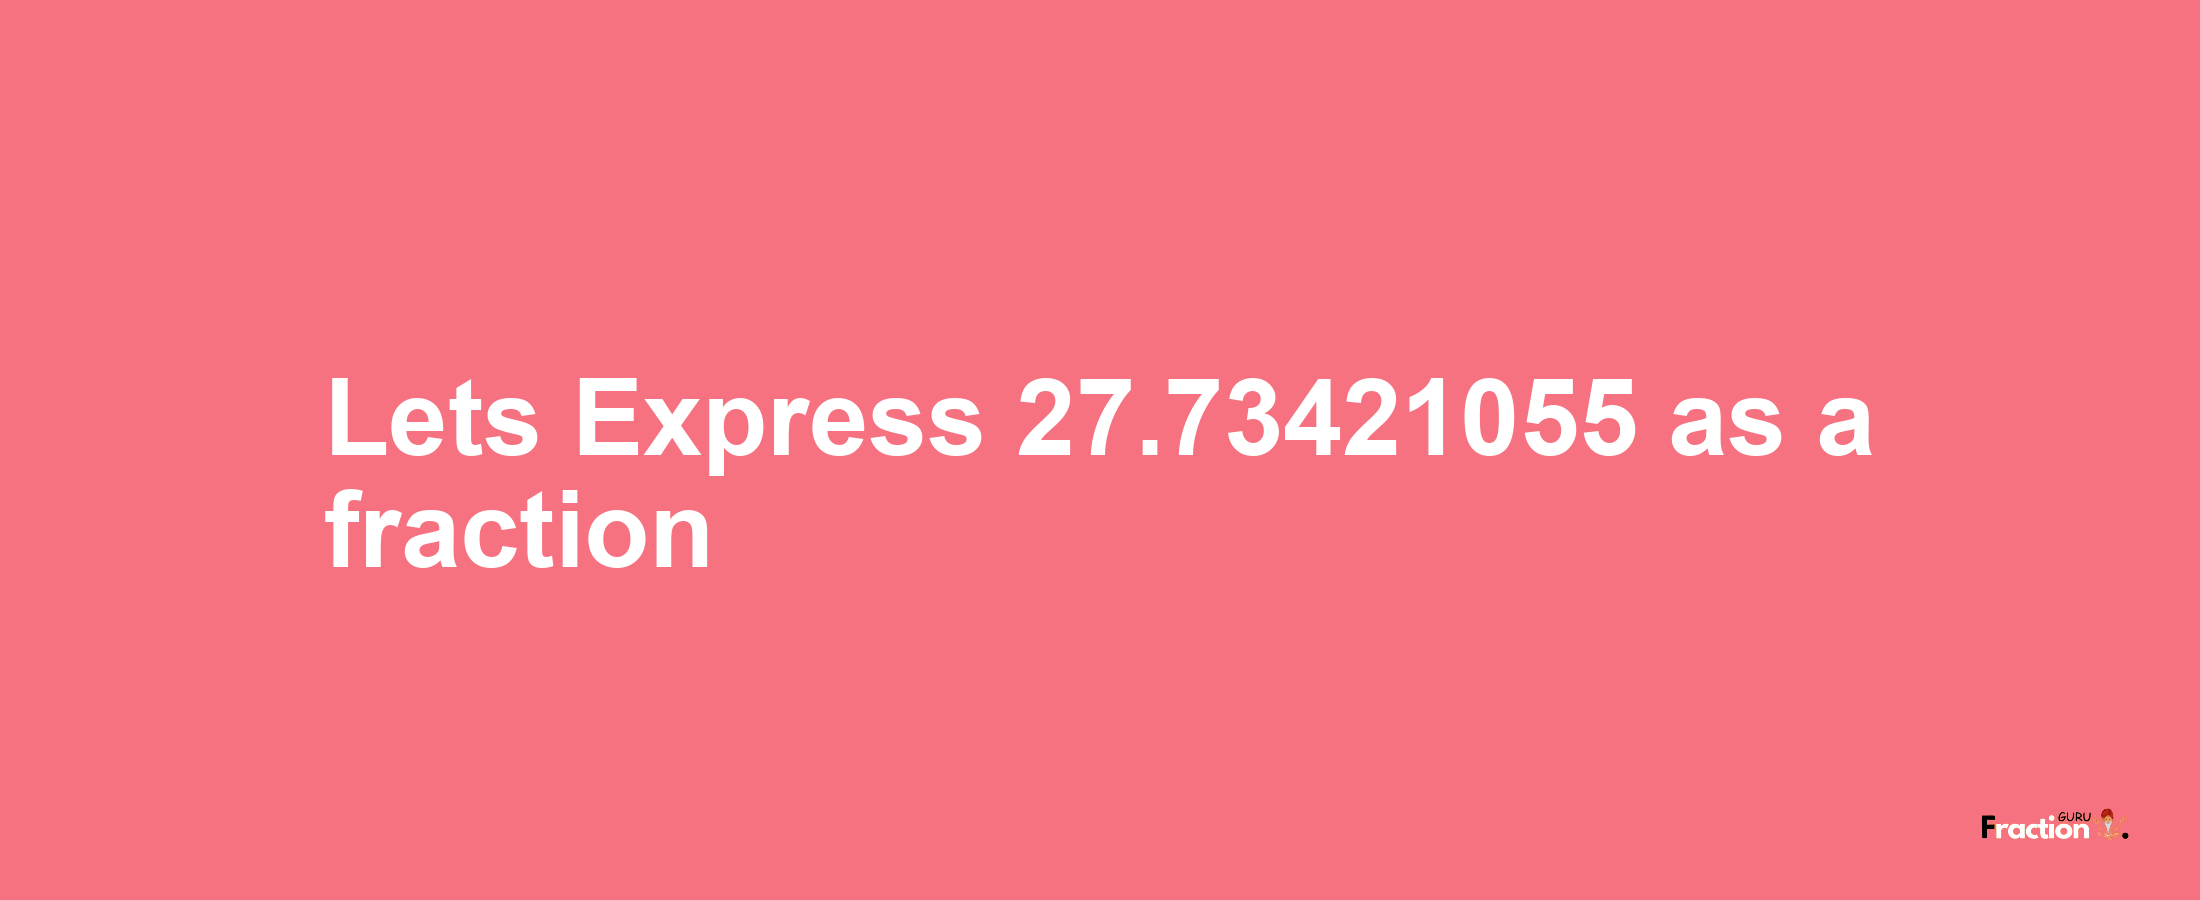 Lets Express 27.73421055 as afraction